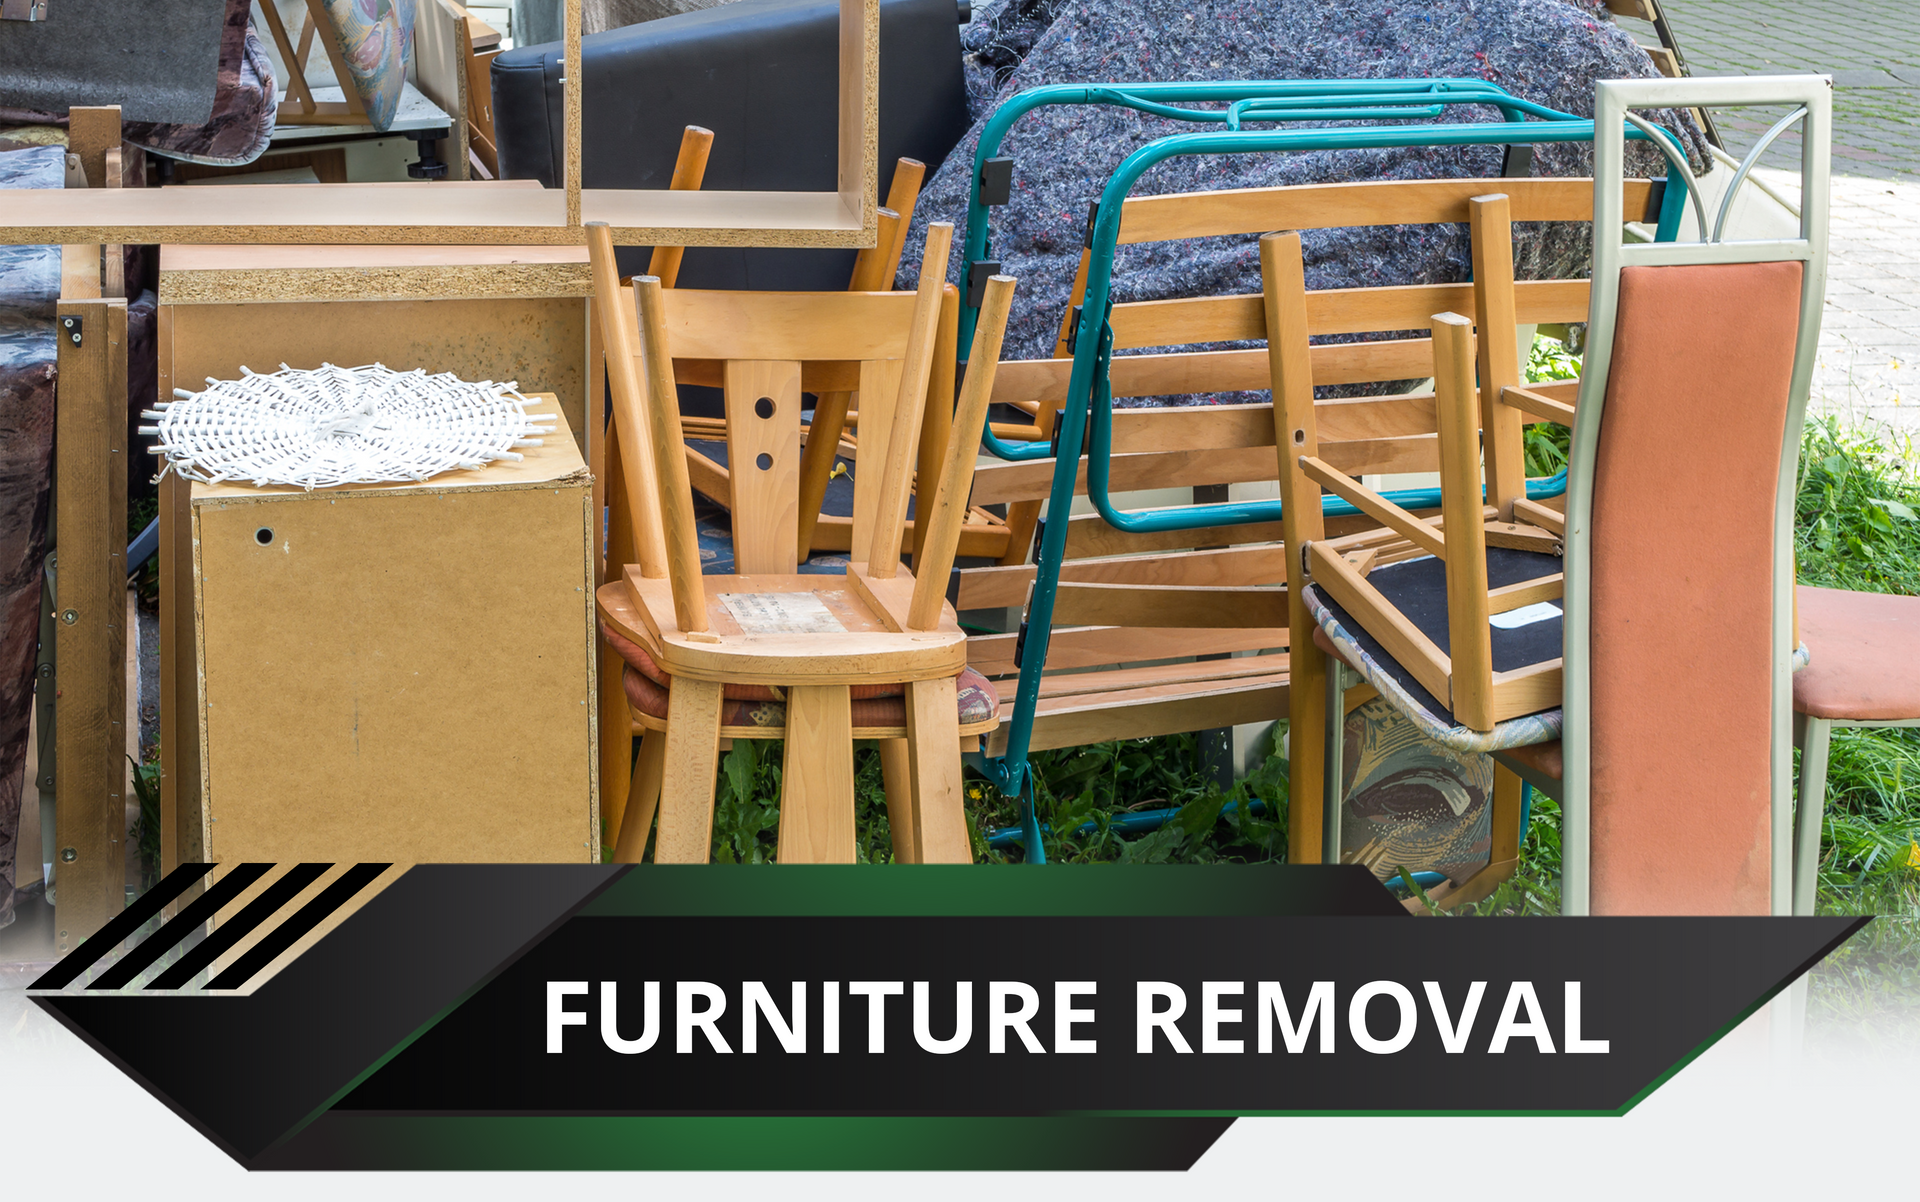 Furniture removal in Madera, CA